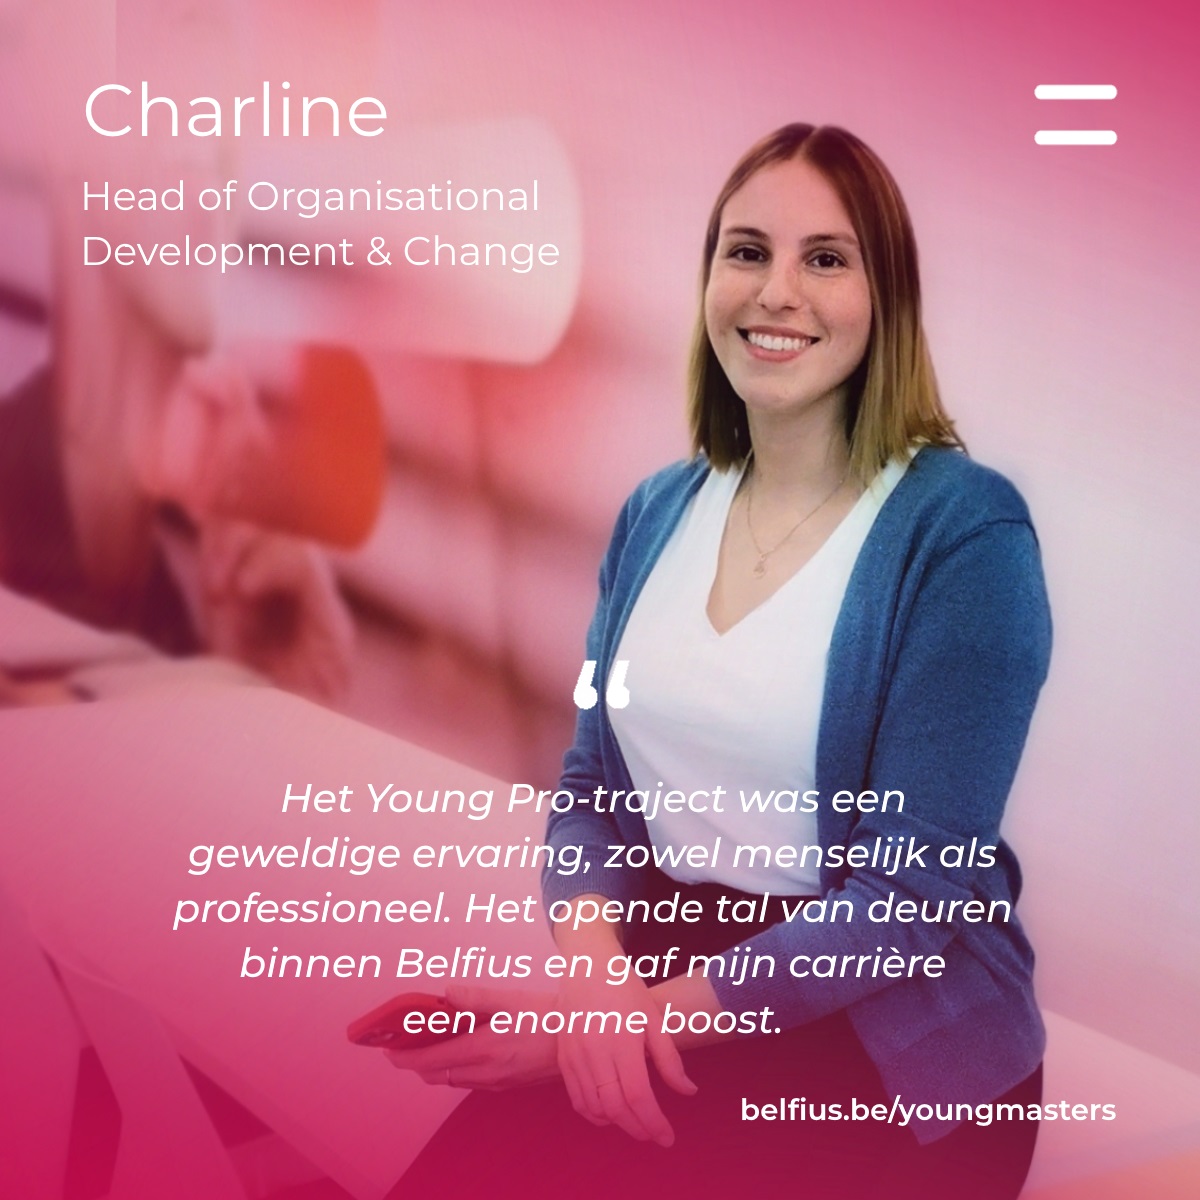 Charline Young Pro